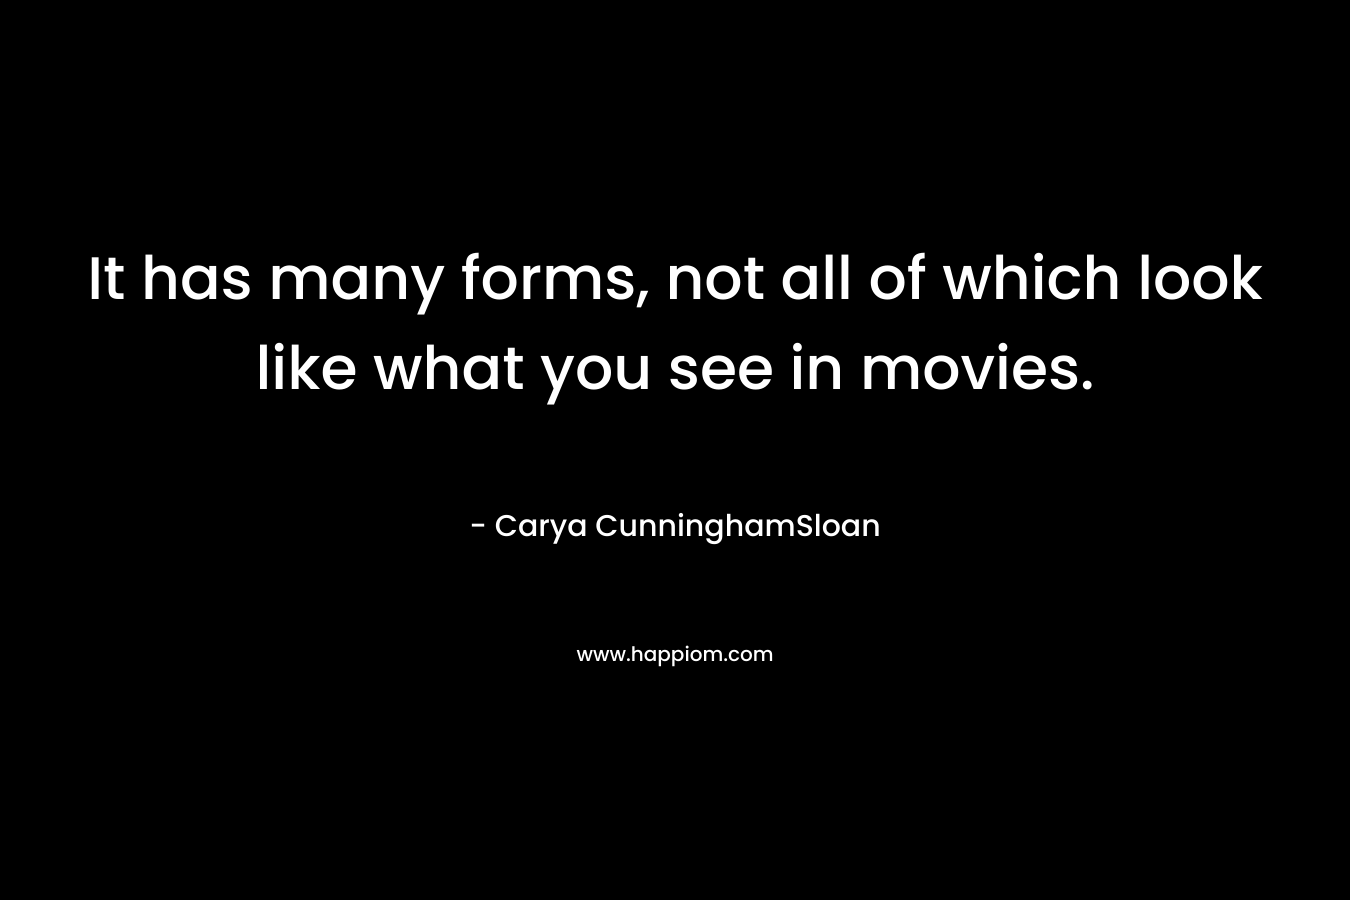 It has many forms, not all of which look like what you see in movies. – Carya CunninghamSloan